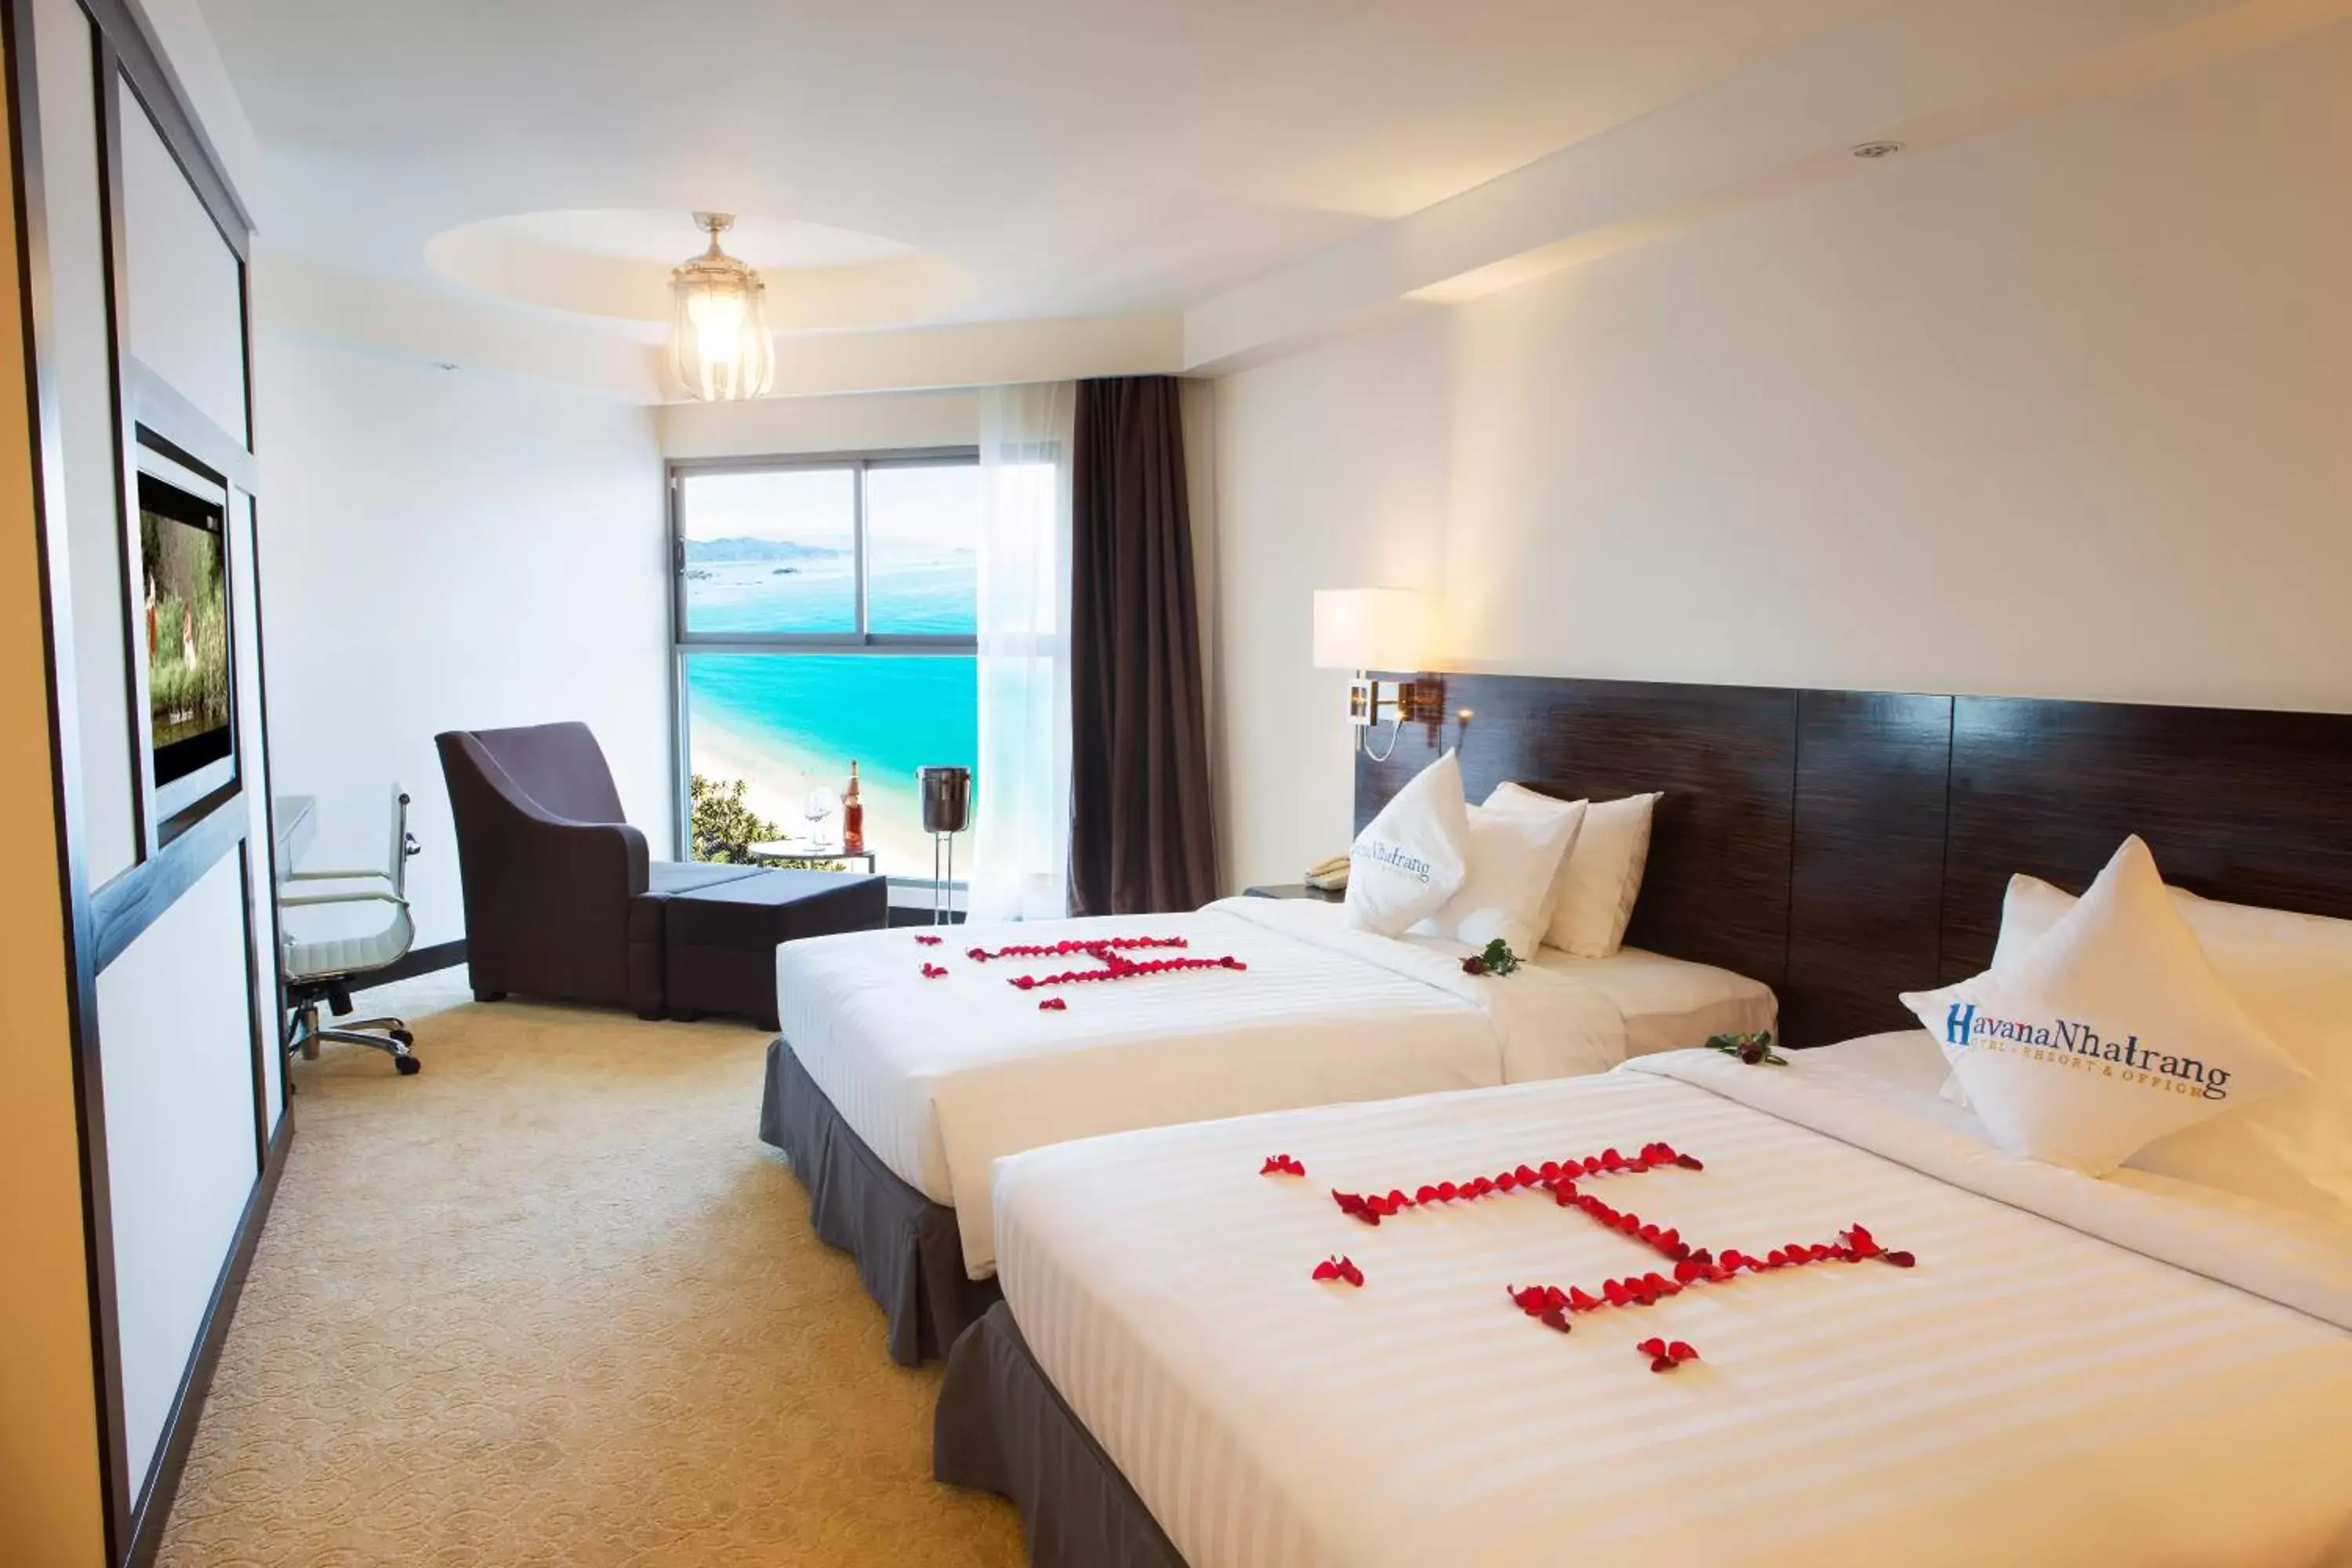 Deluxe Twin Room with Sea View in Havana Nha Trang Hotel